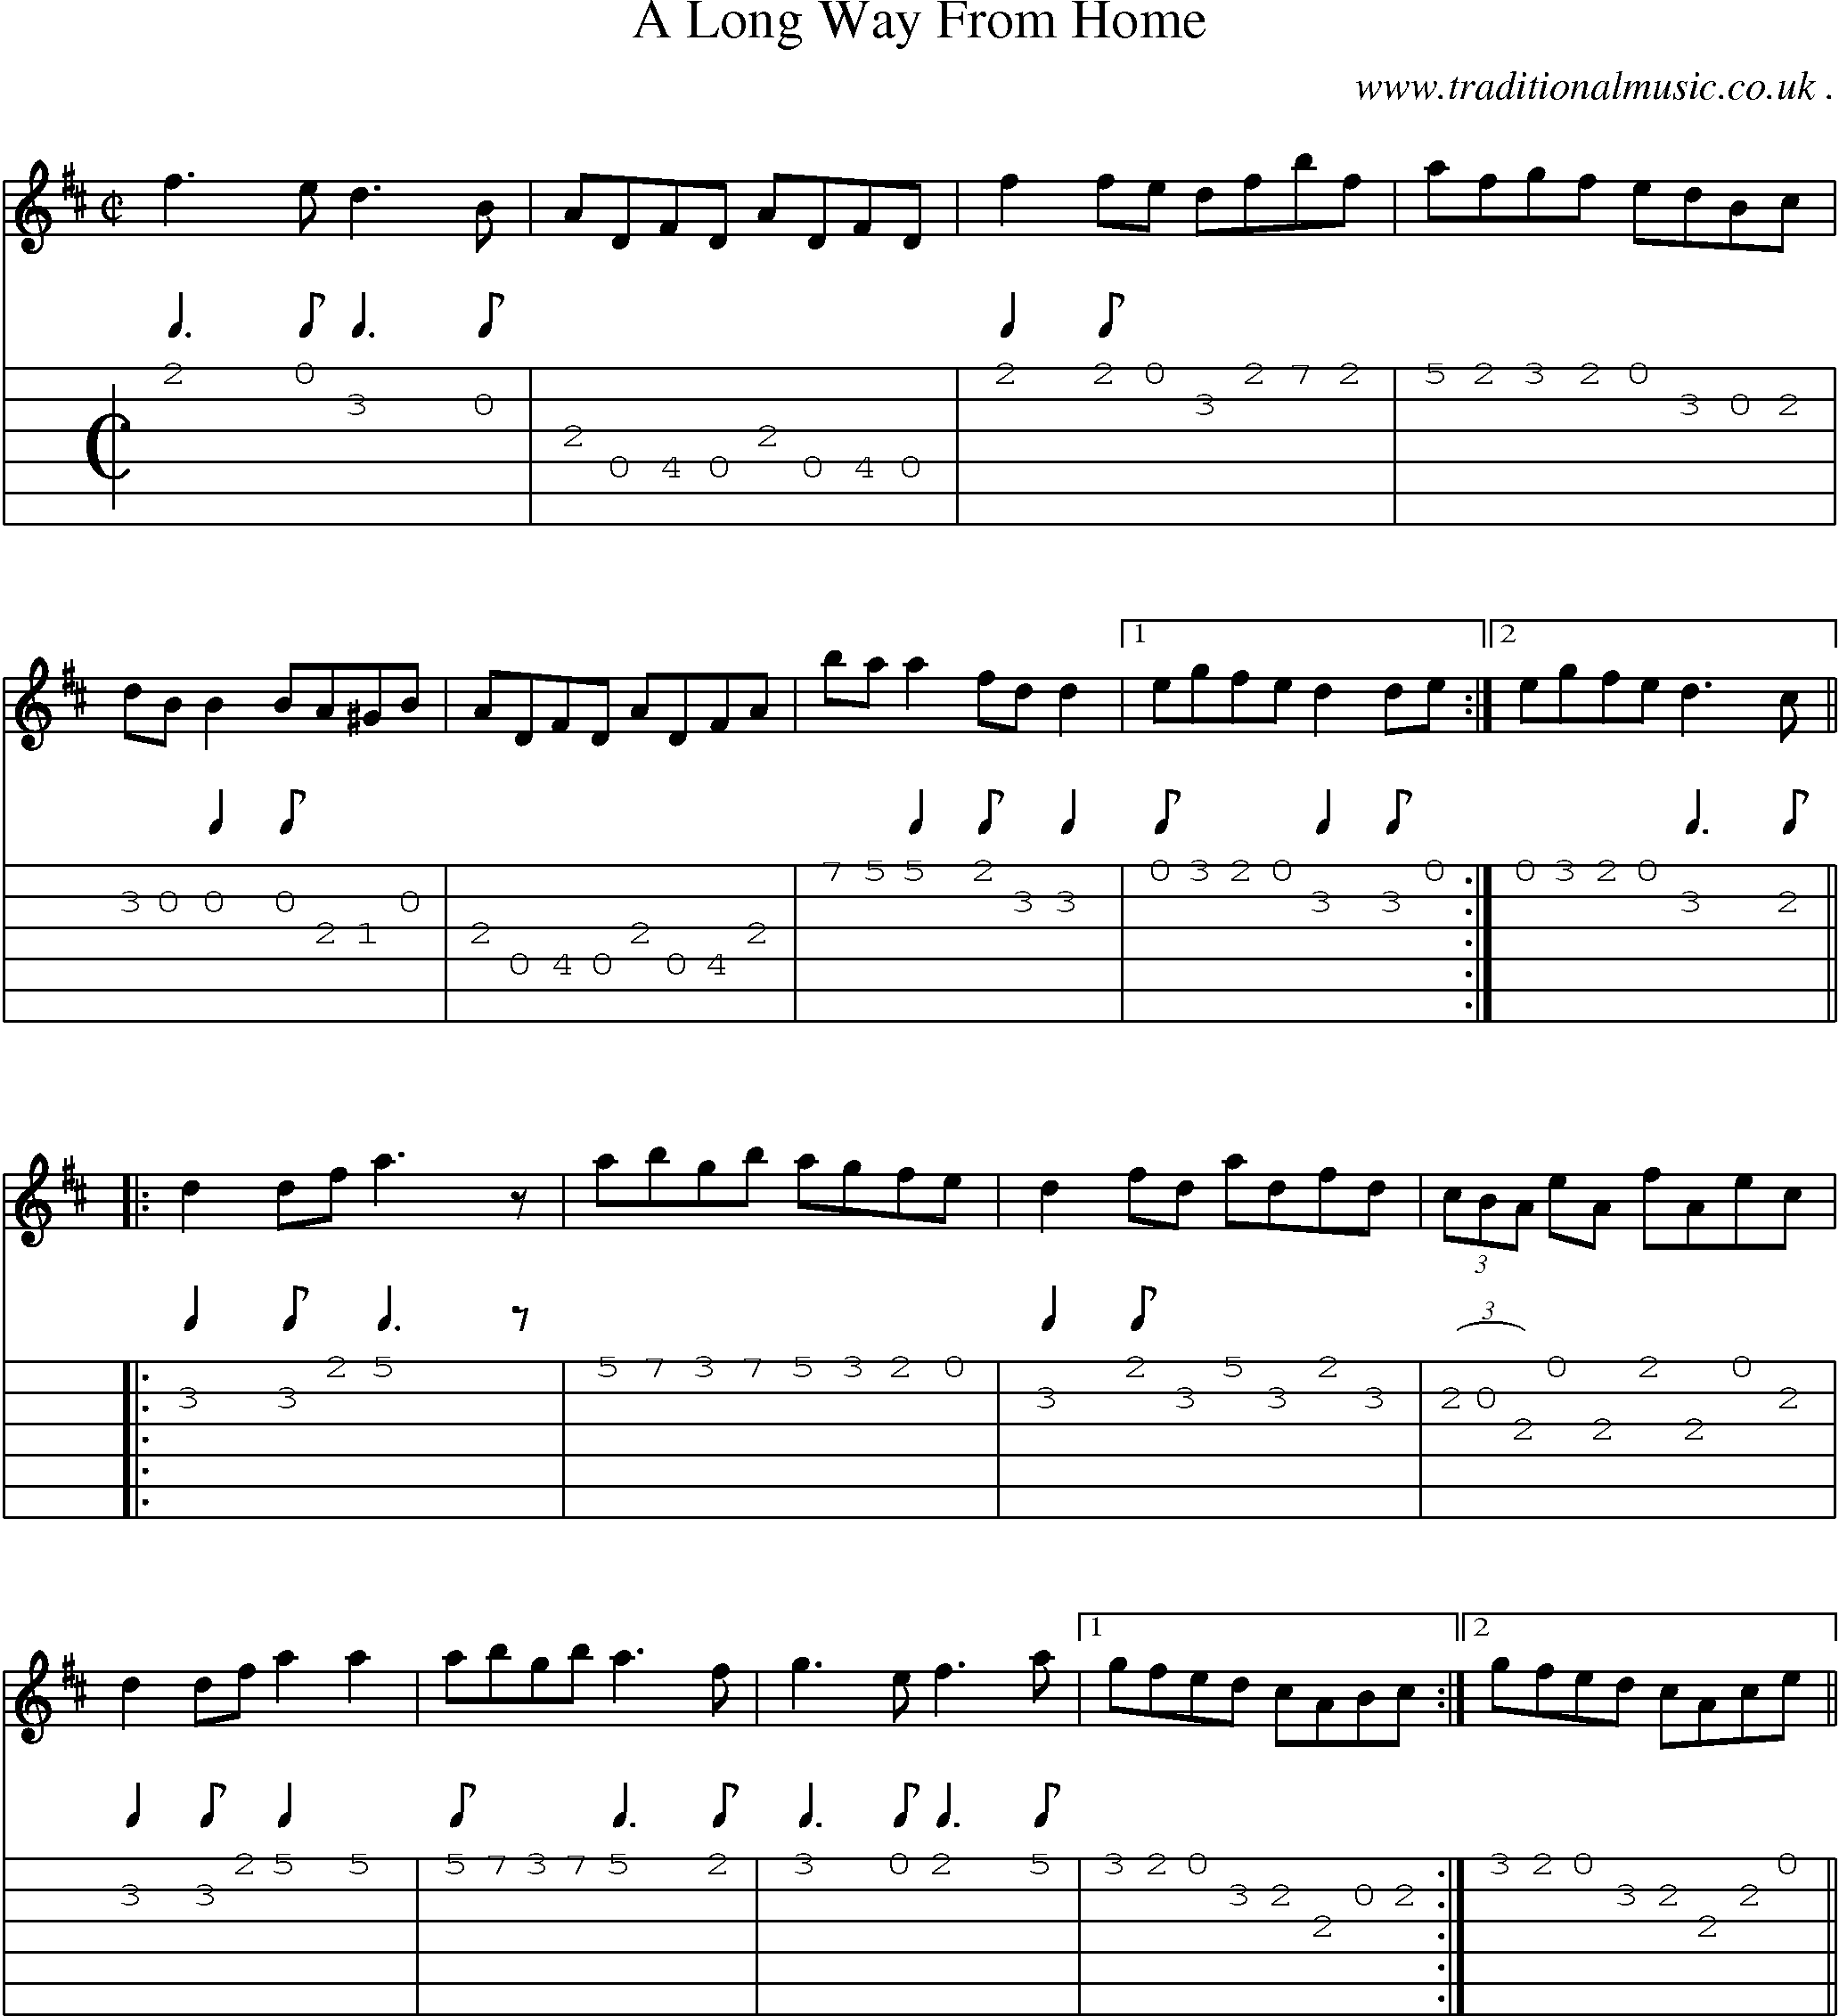 Sheet-Music and Guitar Tabs for A Long Way From Home